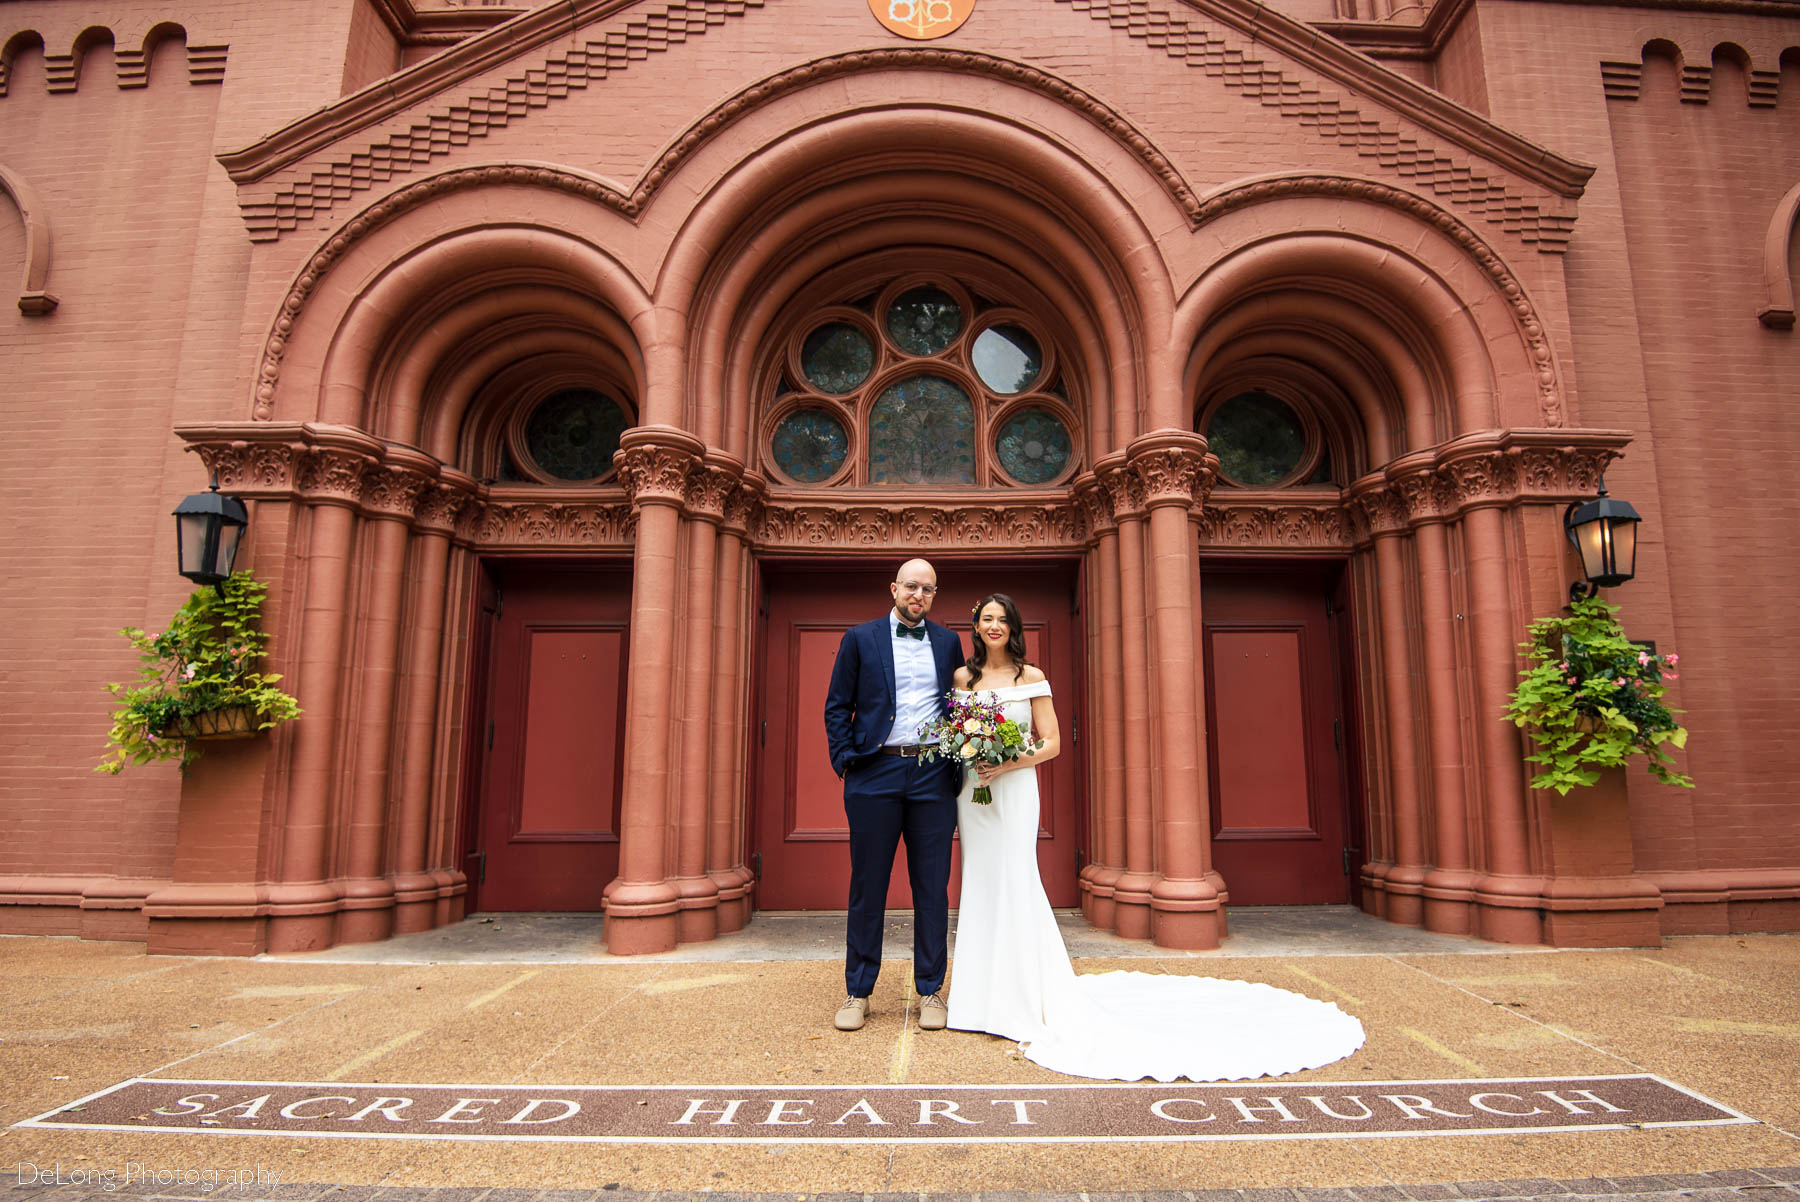 A portrait of a bride and groom in front of the "Sacred Heart Church" lettering on the ground outside the Basilica of the Sacred Heart of Jesus in Atlanta, GA by Charlotte wedding photographers DeLong Photography